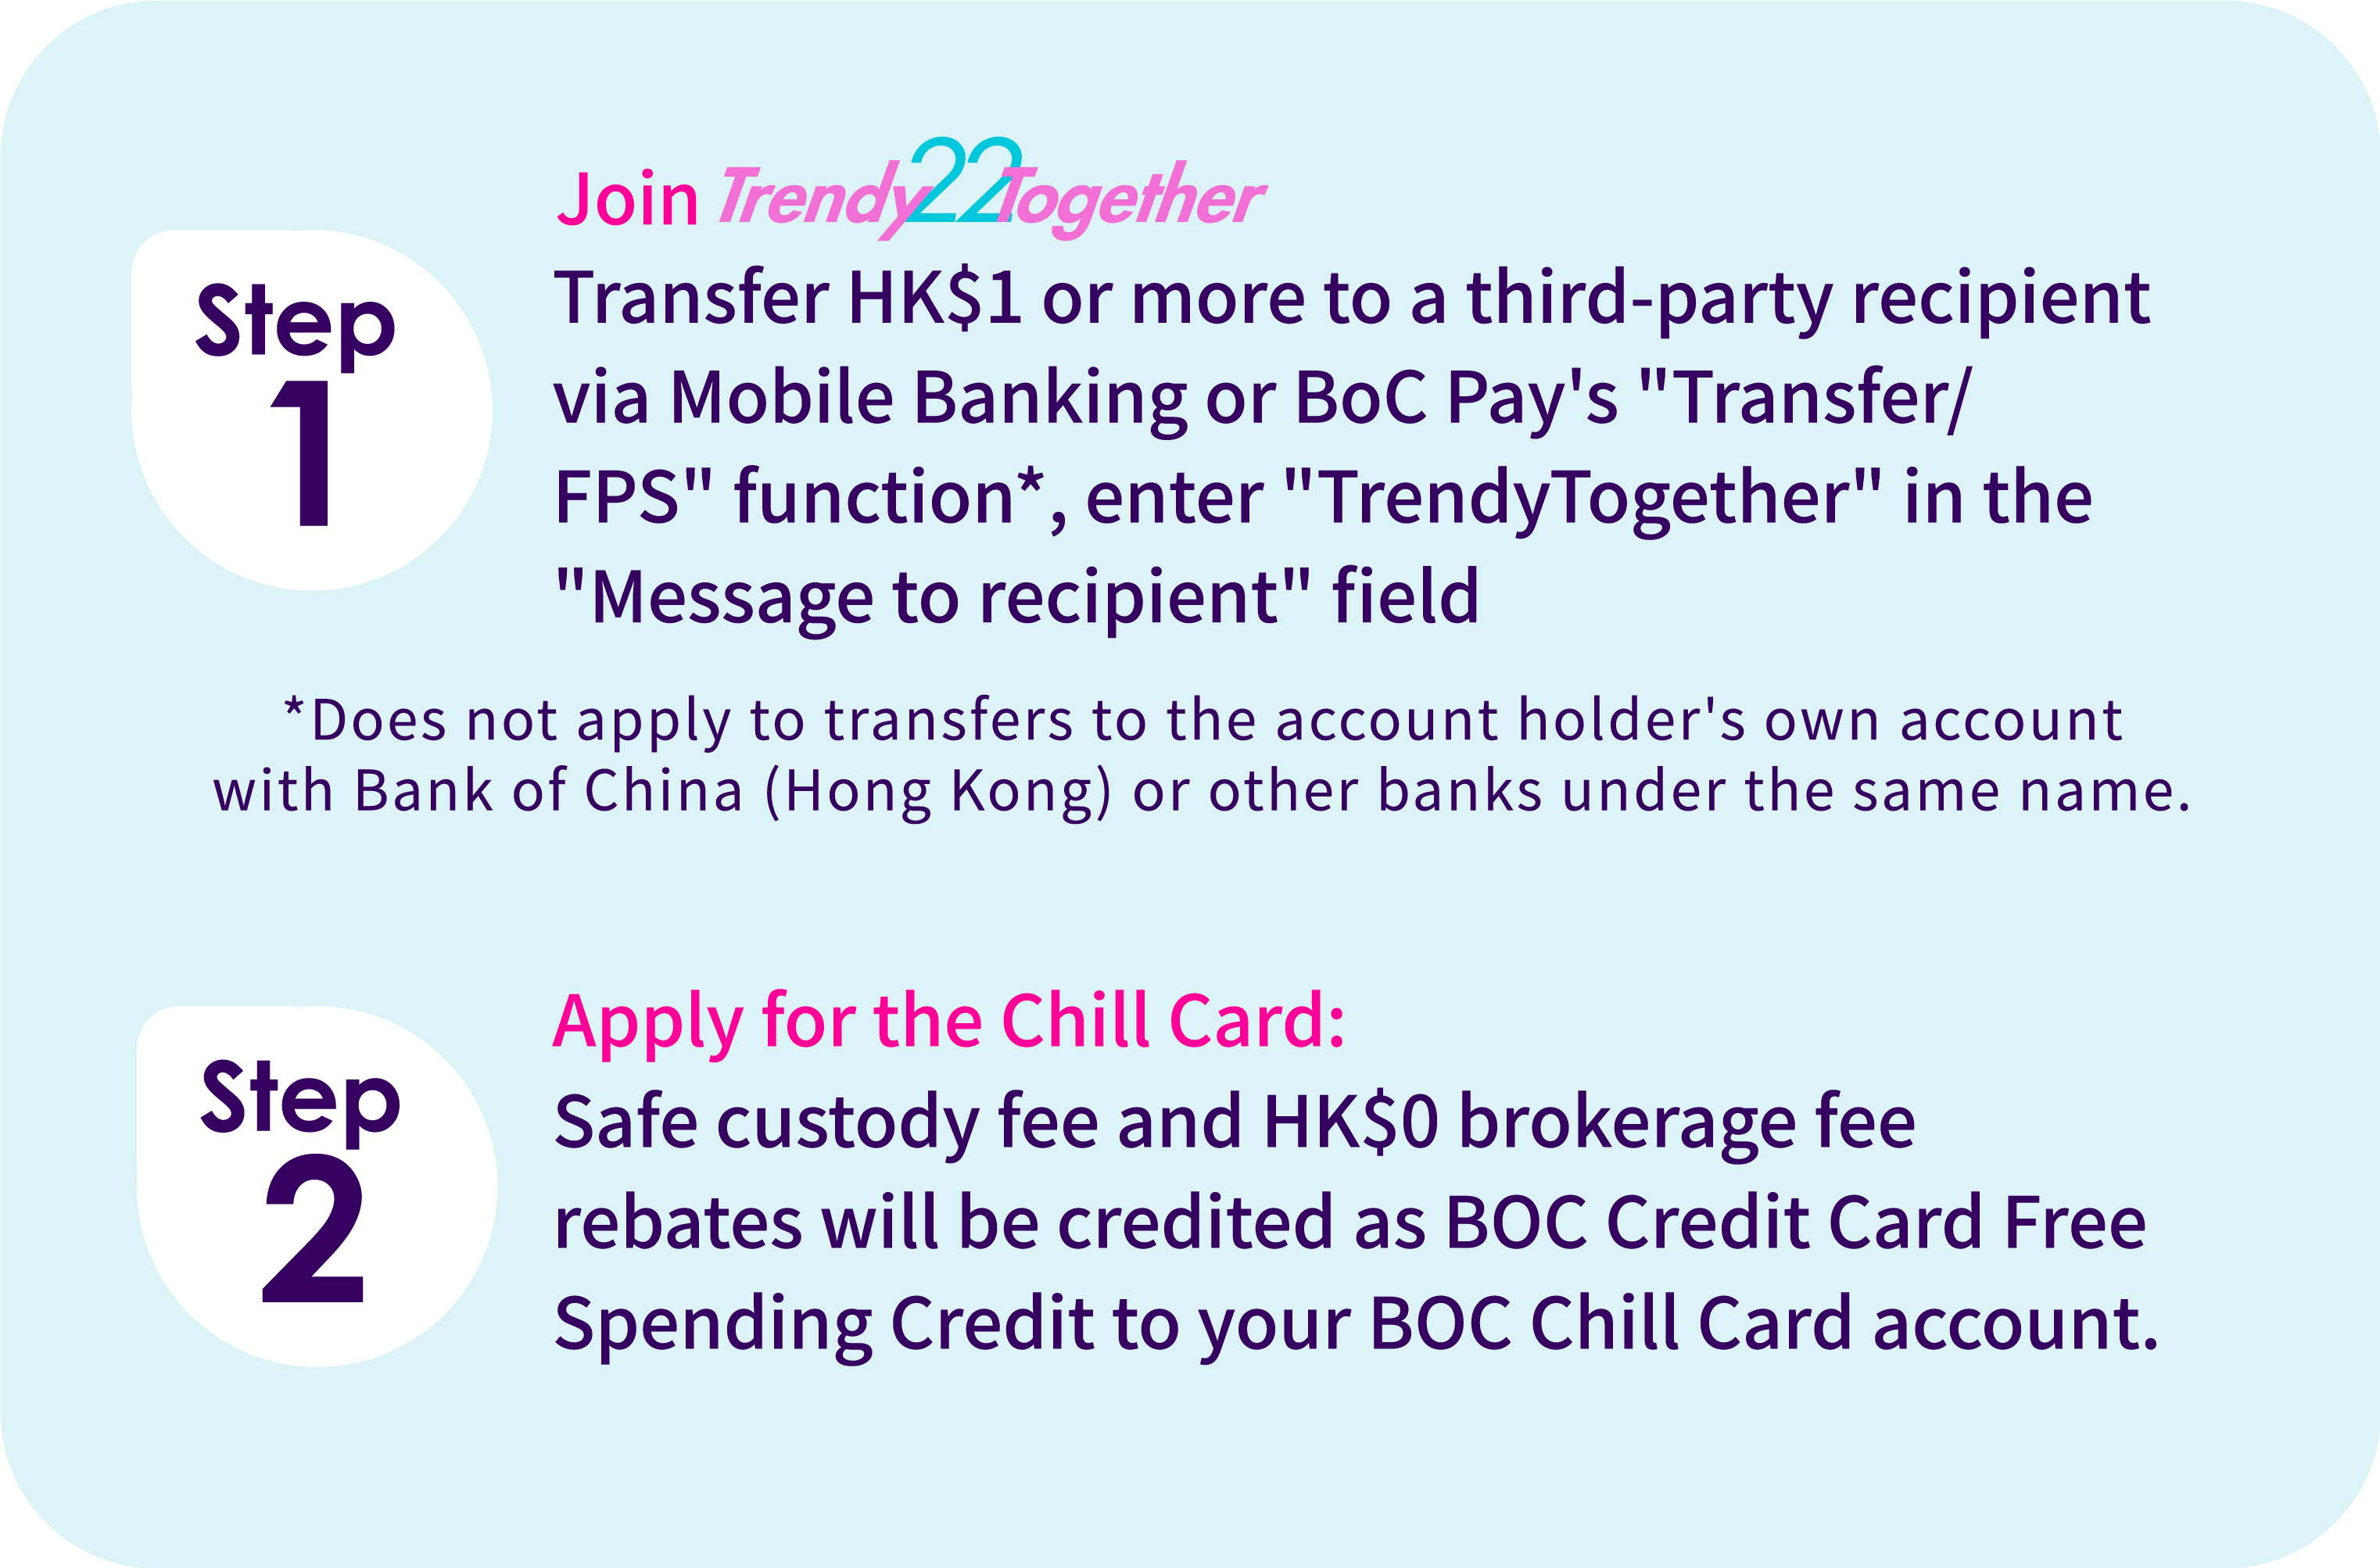 Step 1) Join TrendyTogether Transfer HK$1 or more to a third-party recipient via Mobile Banking or BoC Pay's 